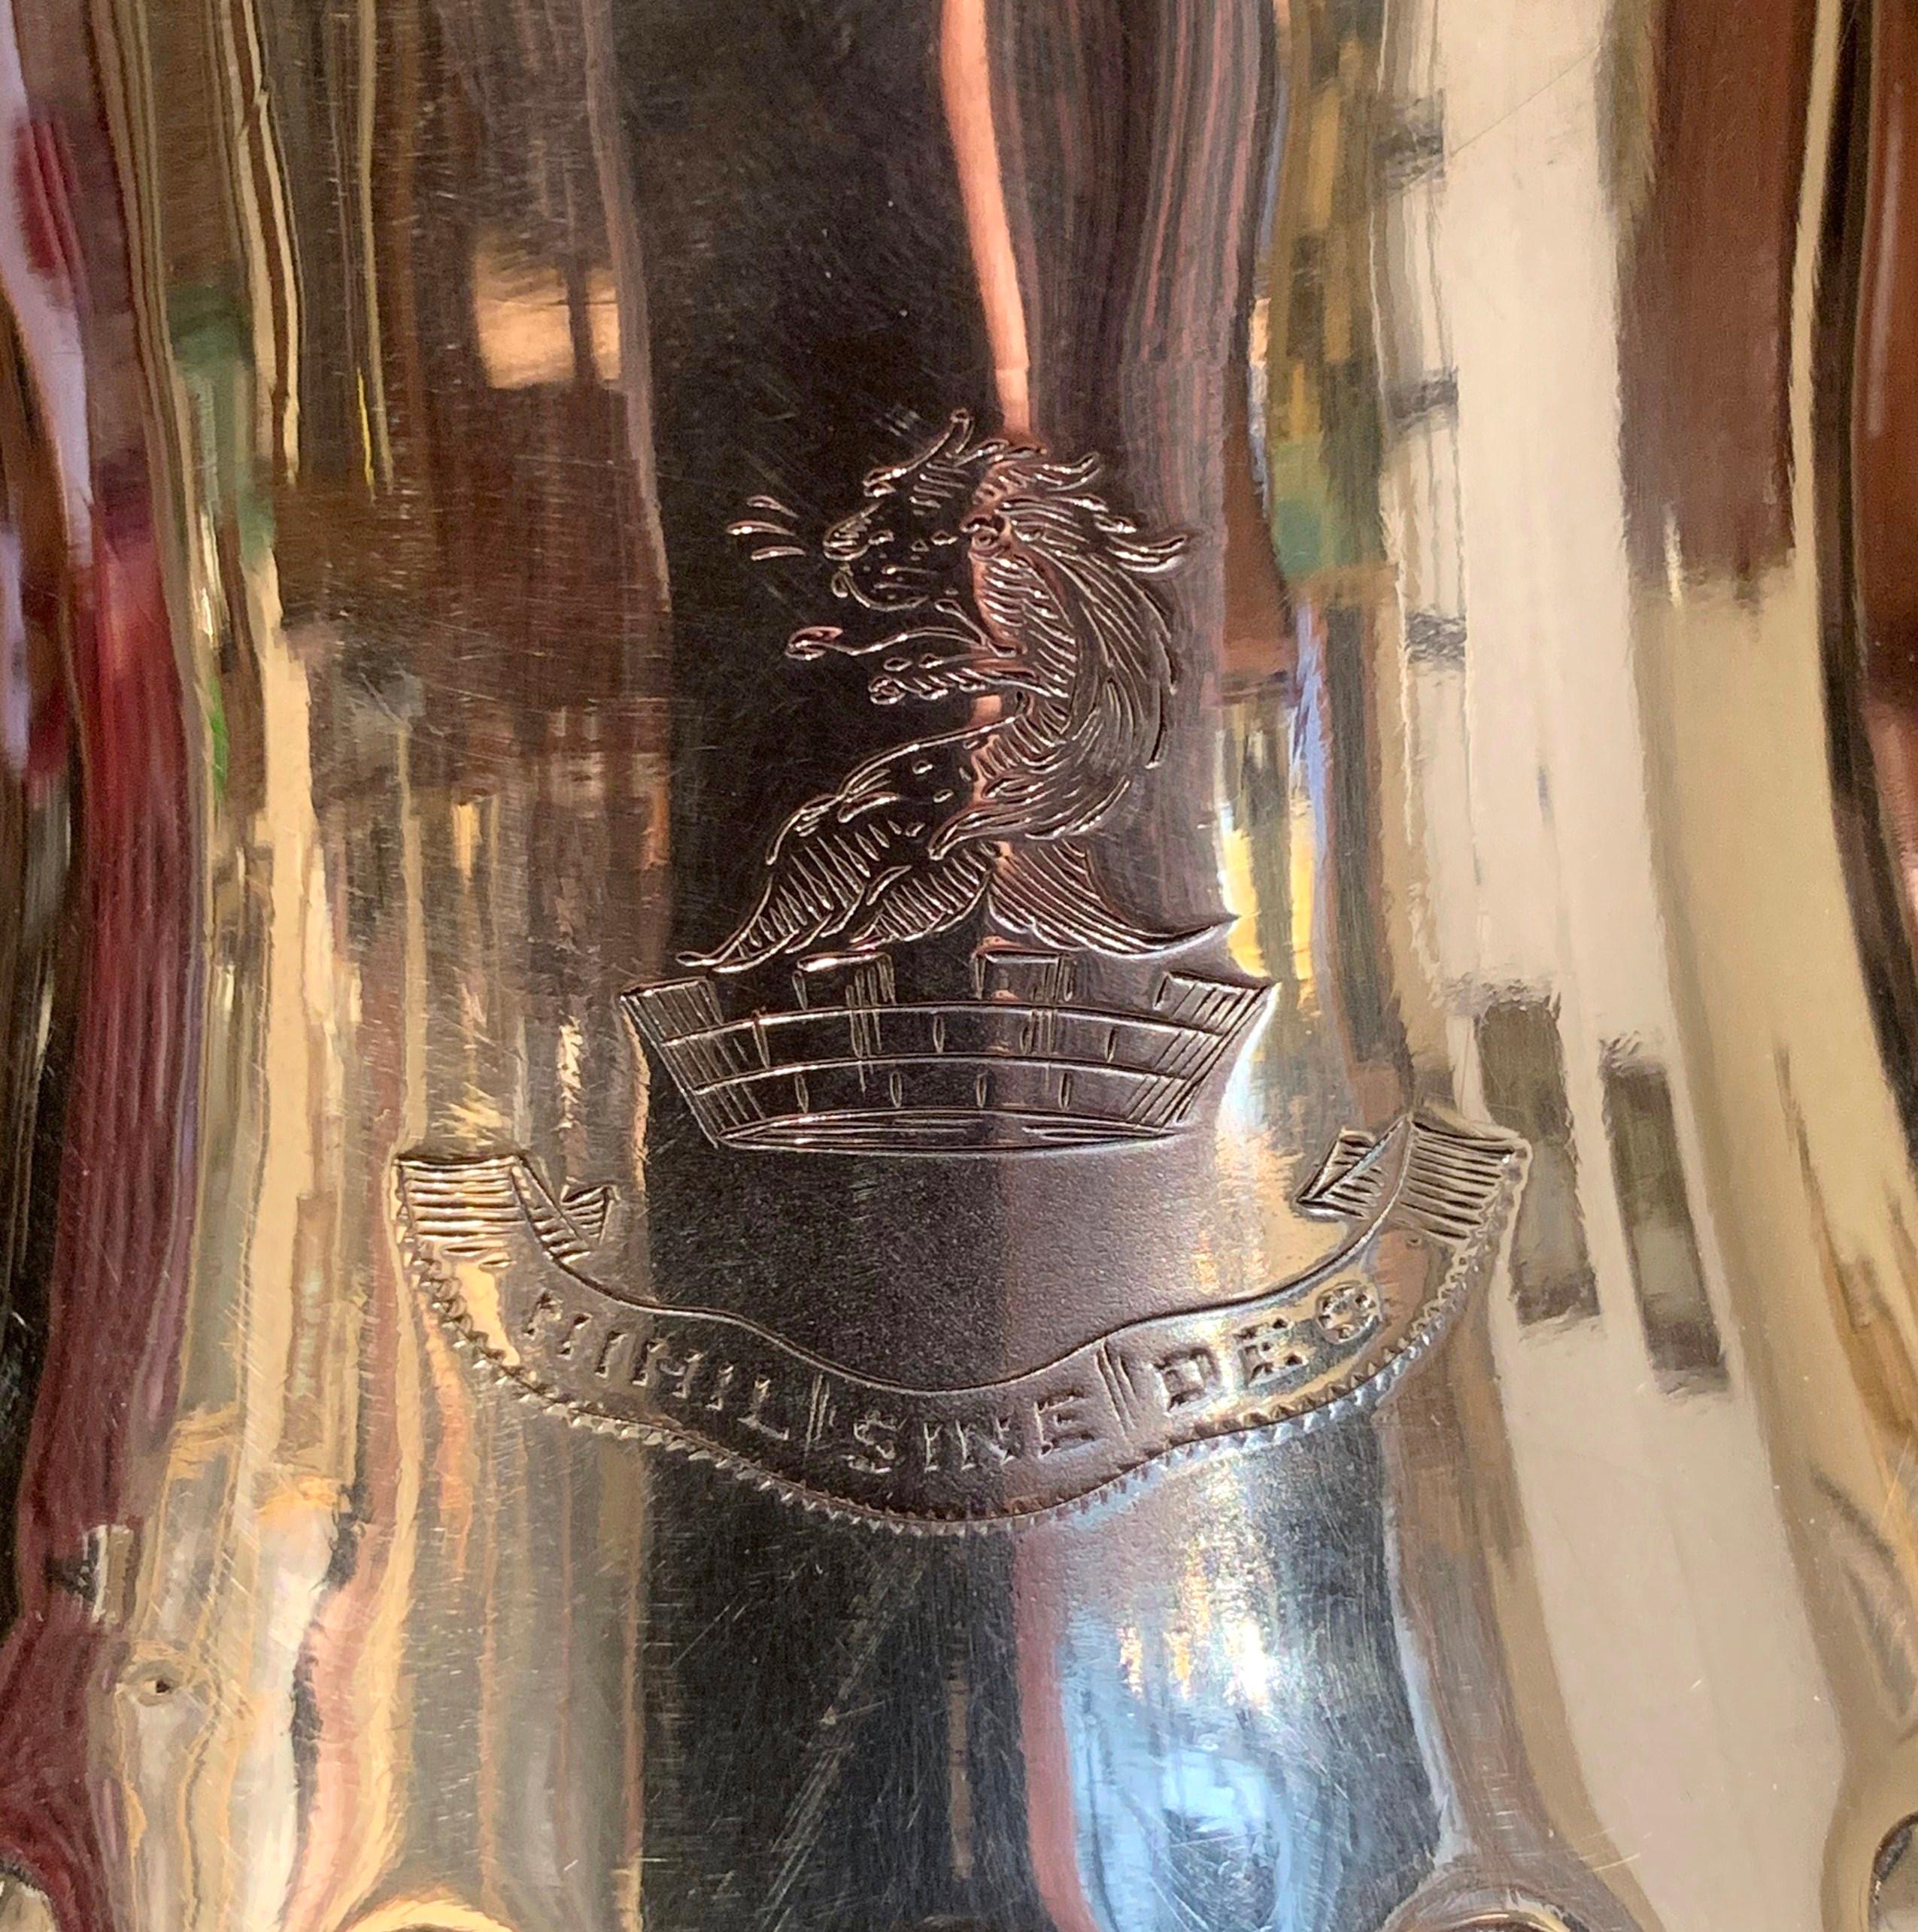 Silvered Early 20th Century English Silver Plated Pitcher with Engraved Crest